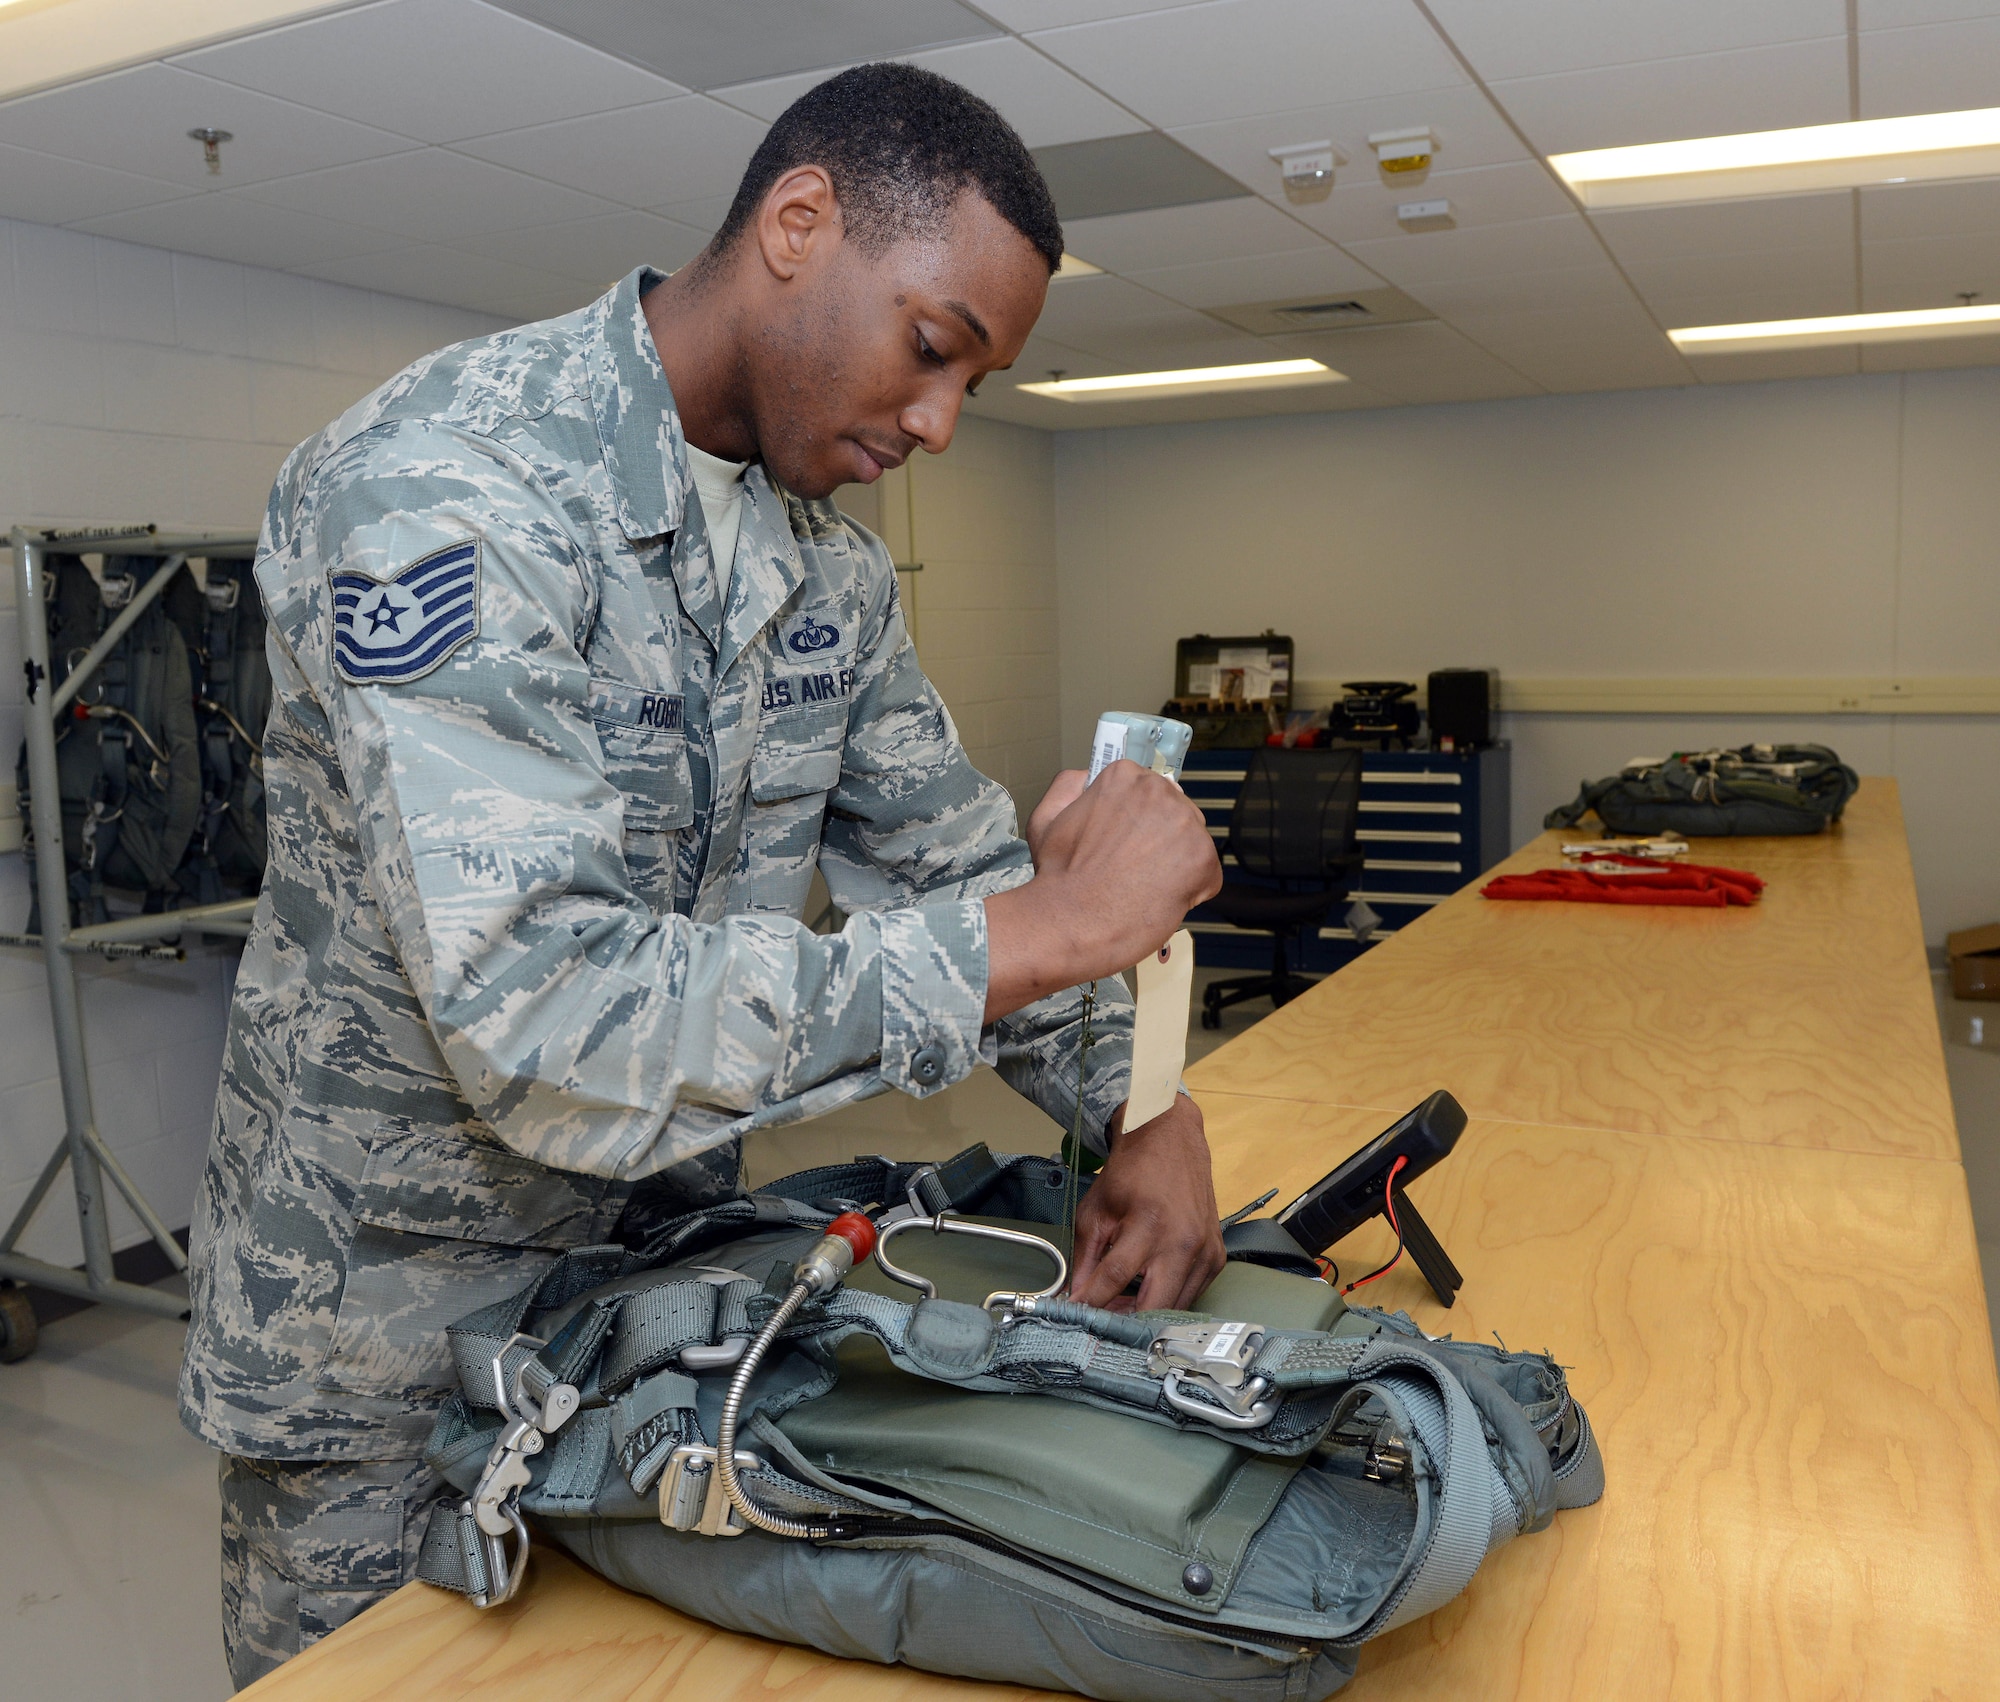 Tech. Sgt. Stephen Roberts, 339th Flight Test Squadron aircrew flight equipment technician, performs operational checks on parachute ejector snaps. (U.S. Air Force photo by Tommie Horton)